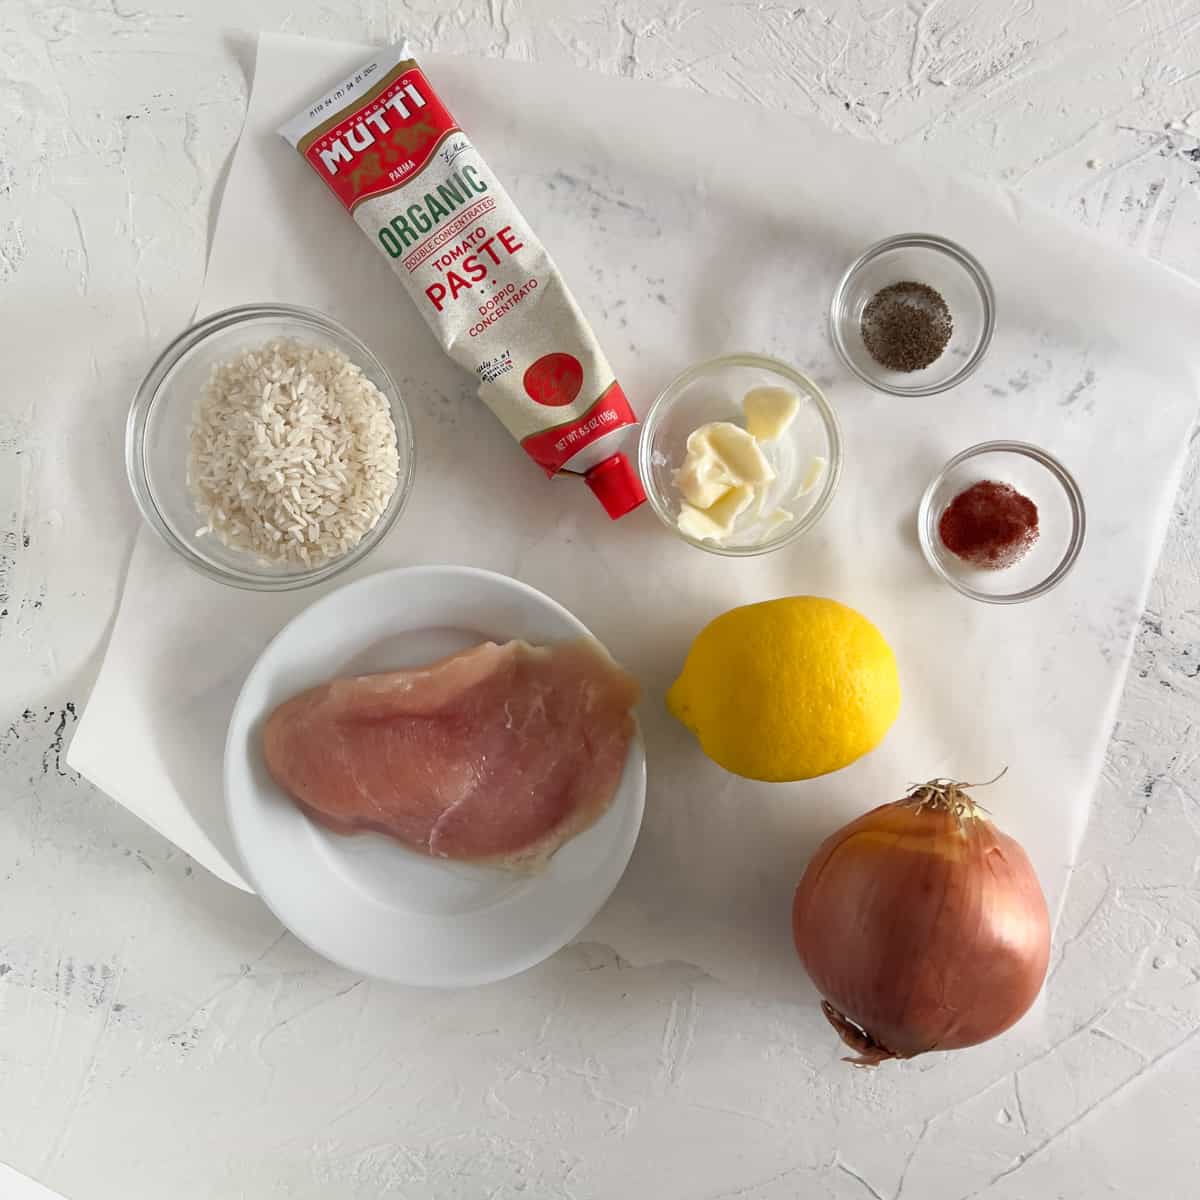 Lemon chicken ingredients: uncooked chicken breast rice, lemon, onion and tube of Mutti tomato paste on parchment paper.